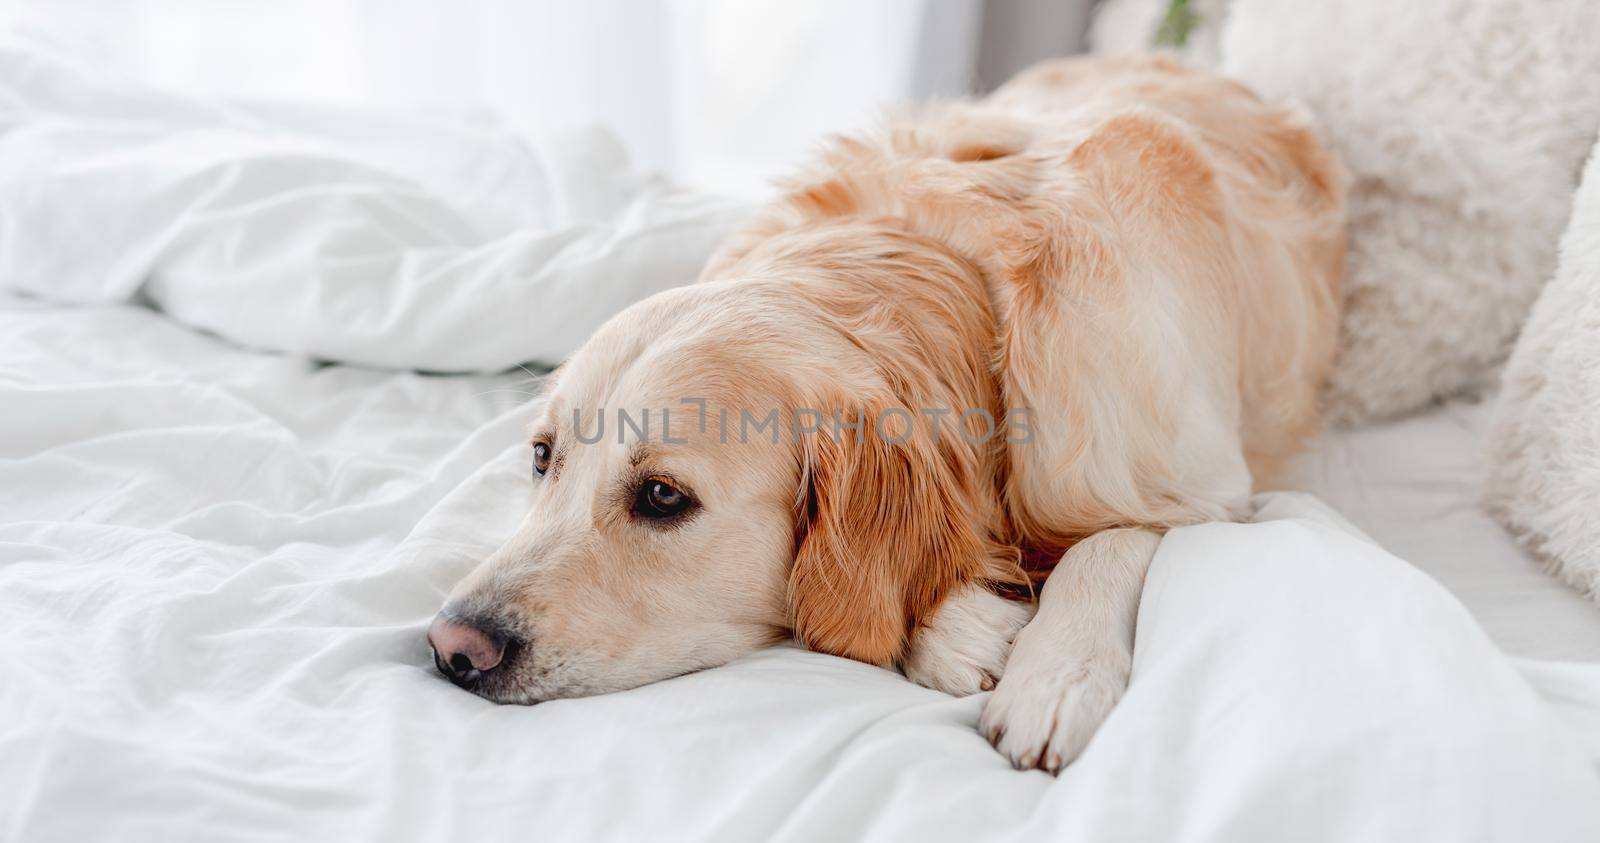 Golden retriever dog lying in the bed. Cute doggy resting at home in the morning time. Portrait of pet indoors with daylight. Beautiful labrador in the bedroom